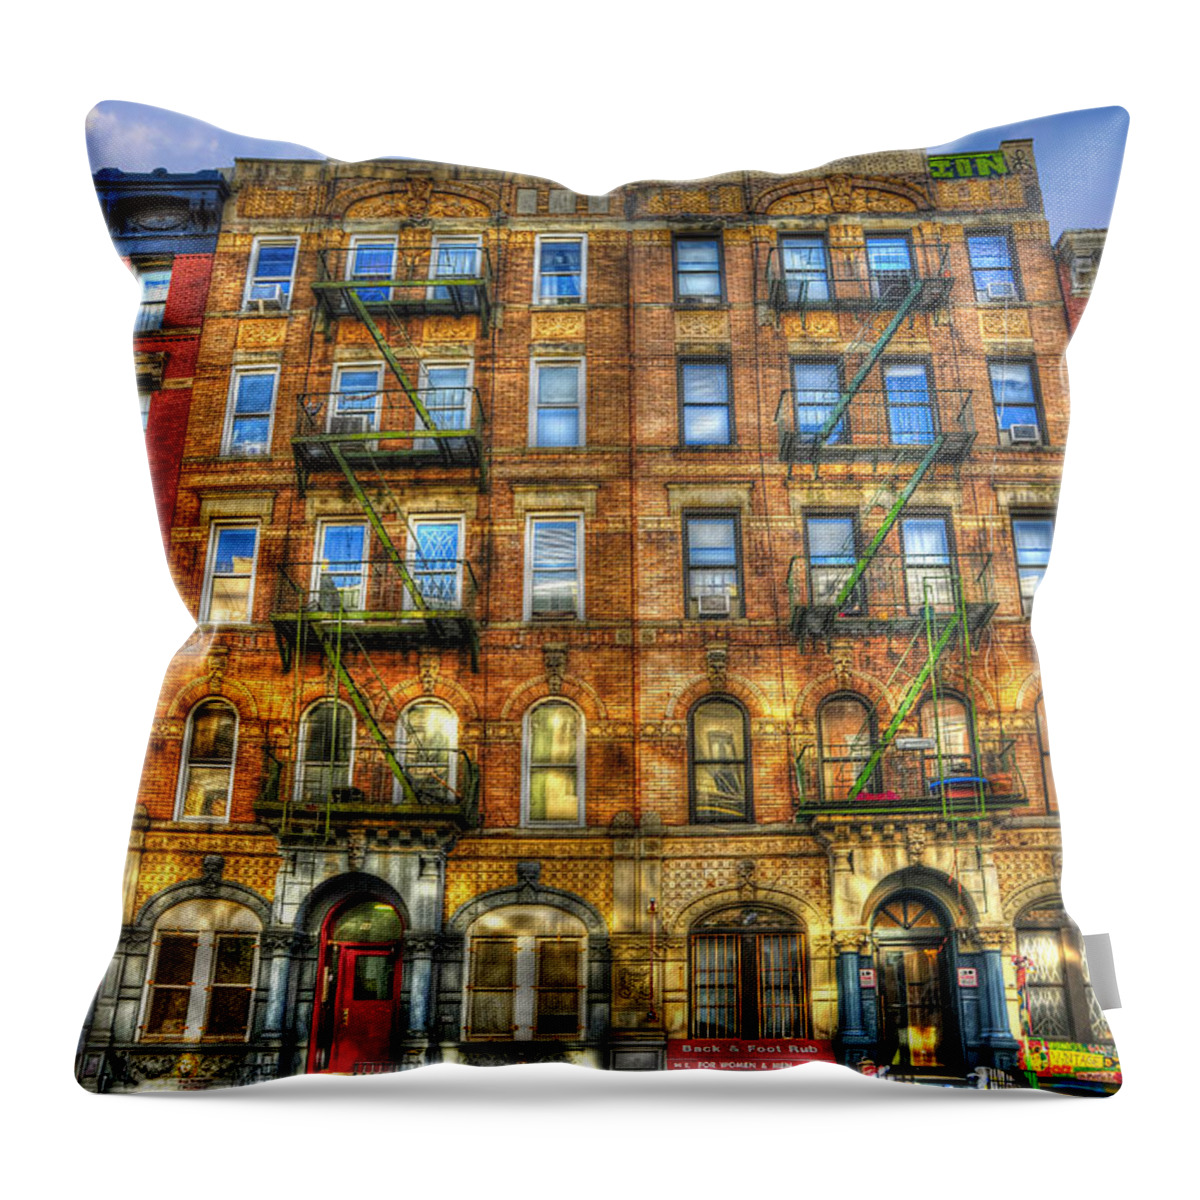 Led Zeppelin Throw Pillow featuring the photograph Led Zeppelin Physical Graffiti Building in Color by Randy Aveille